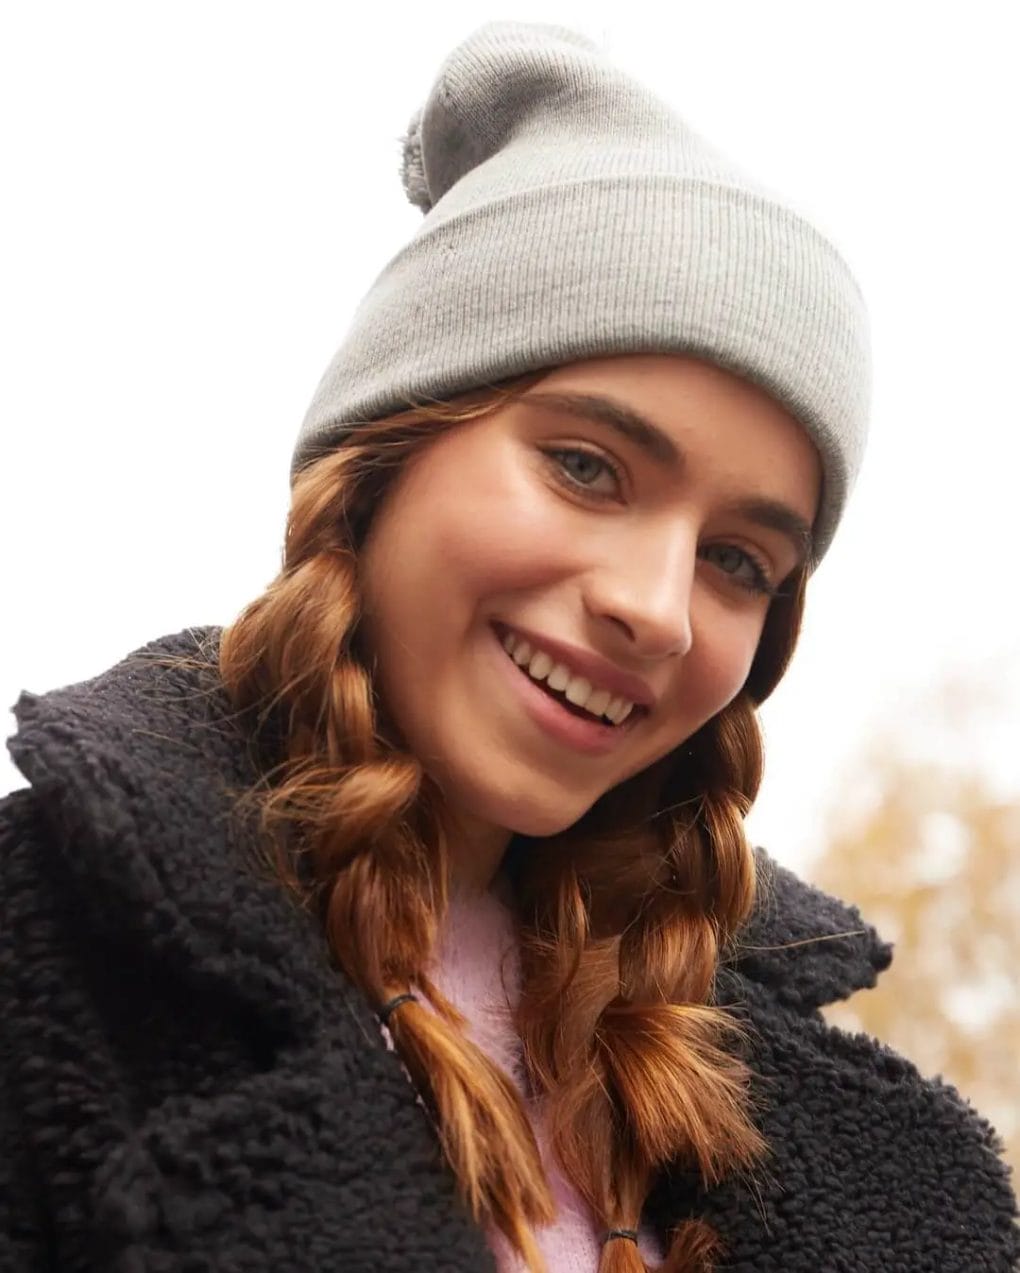 Honey-toned rope braids under a cool grey beanie for a bohemian vibe.